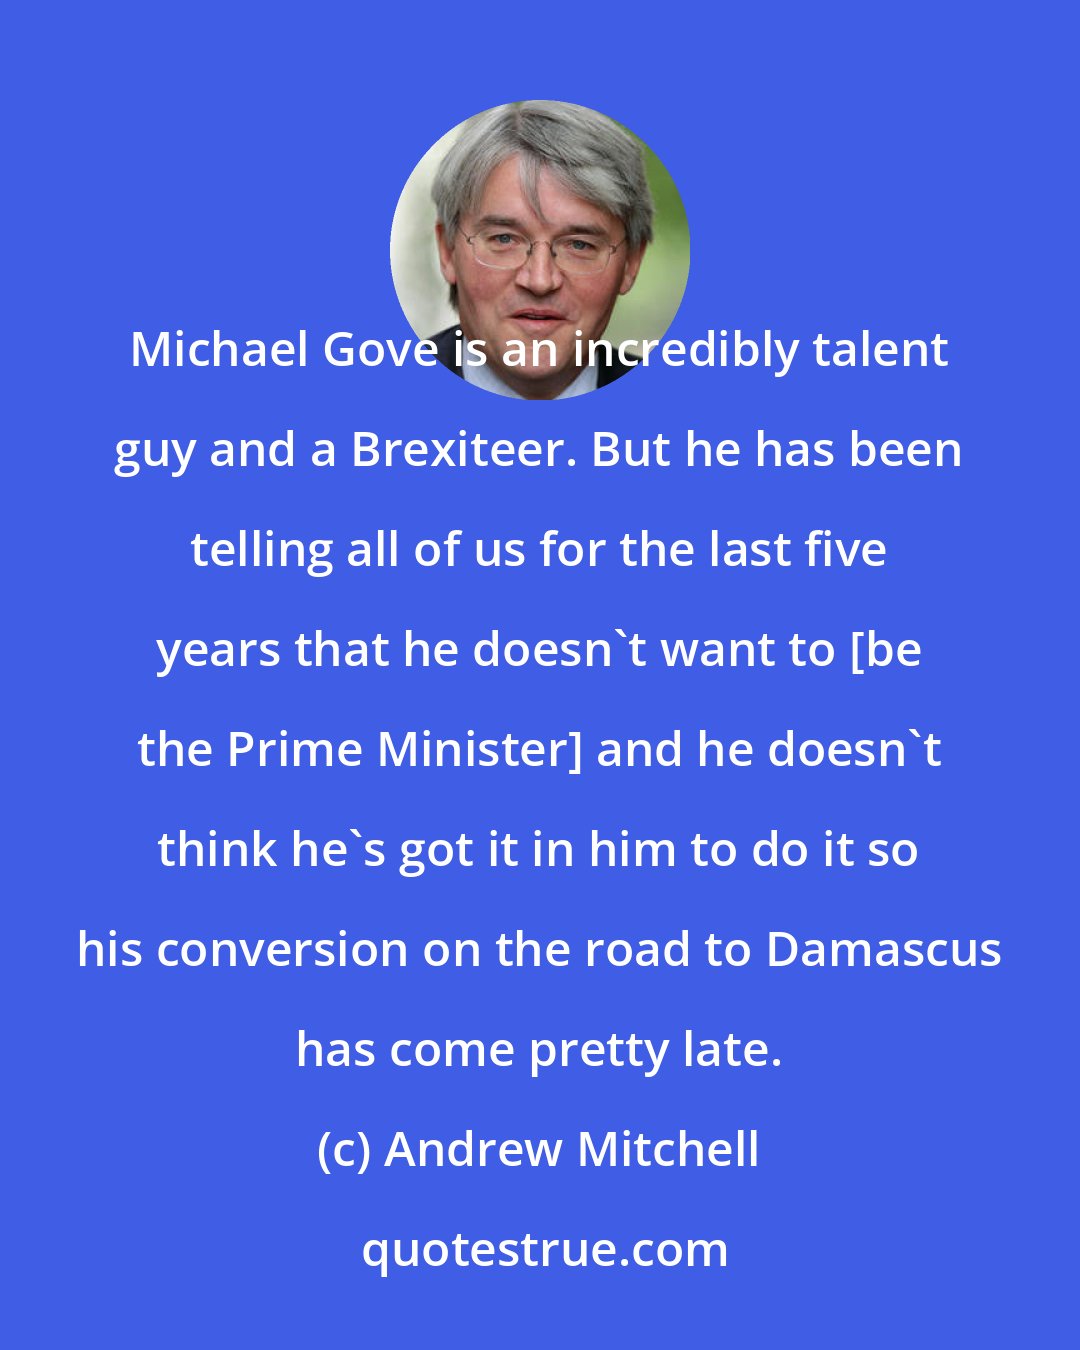 Andrew Mitchell: Michael Gove is an incredibly talent guy and a Brexiteer. But he has been telling all of us for the last five years that he doesn't want to [be the Prime Minister] and he doesn't think he's got it in him to do it so his conversion on the road to Damascus has come pretty late.